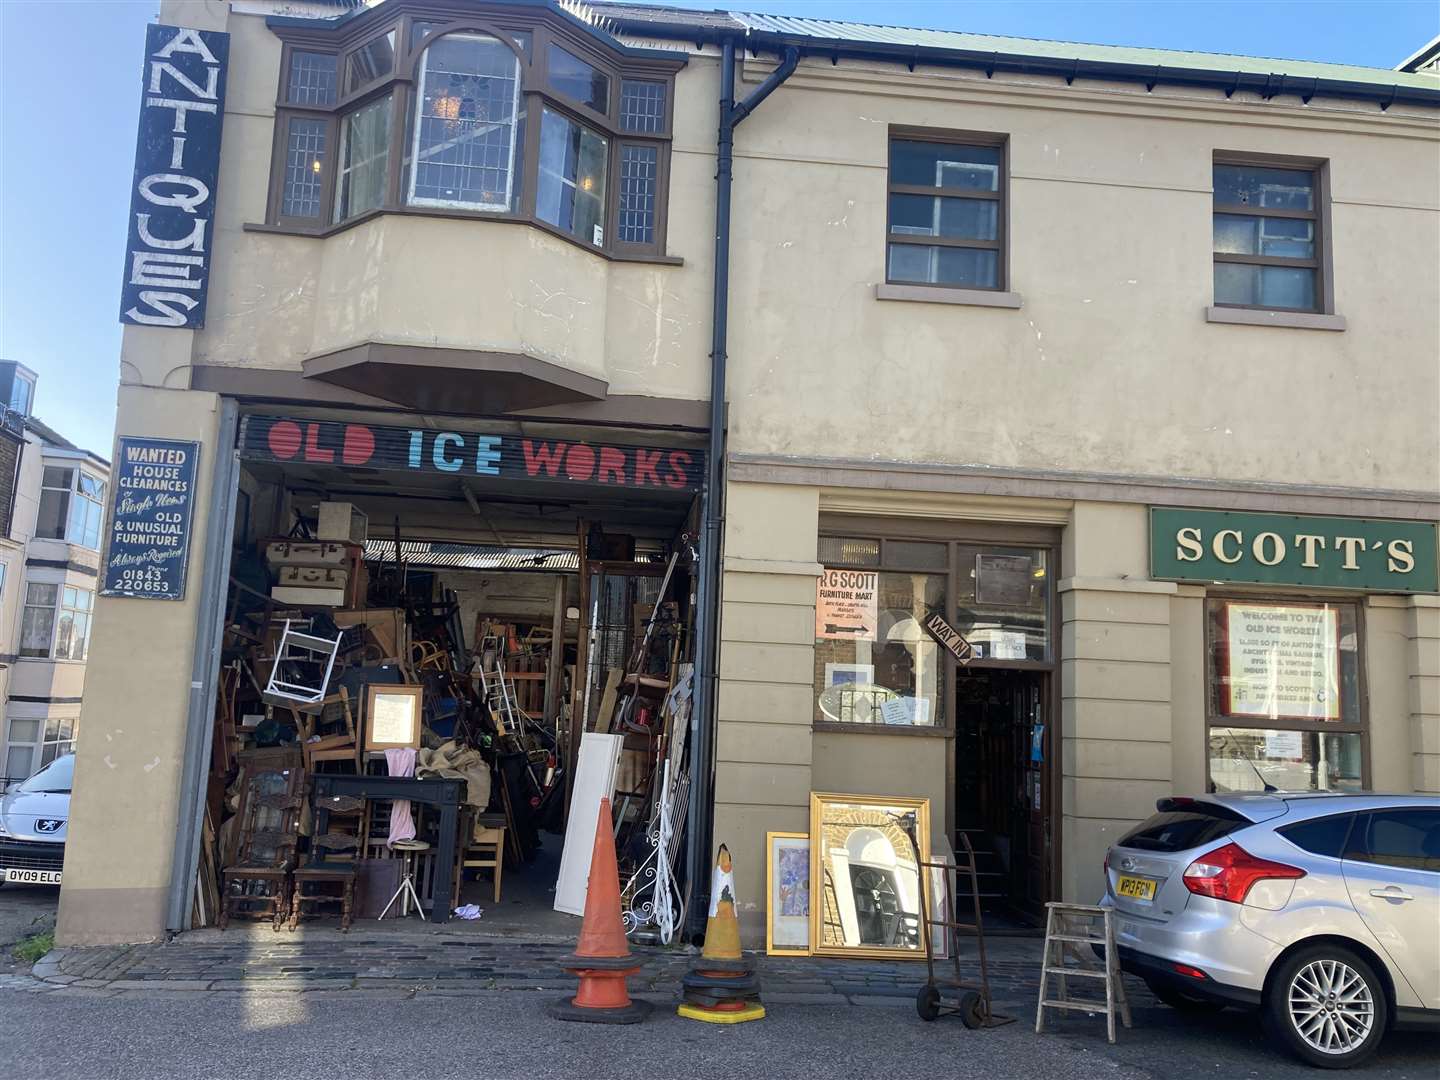 R.G. Scotts has been operating in Cliftonville since 1978